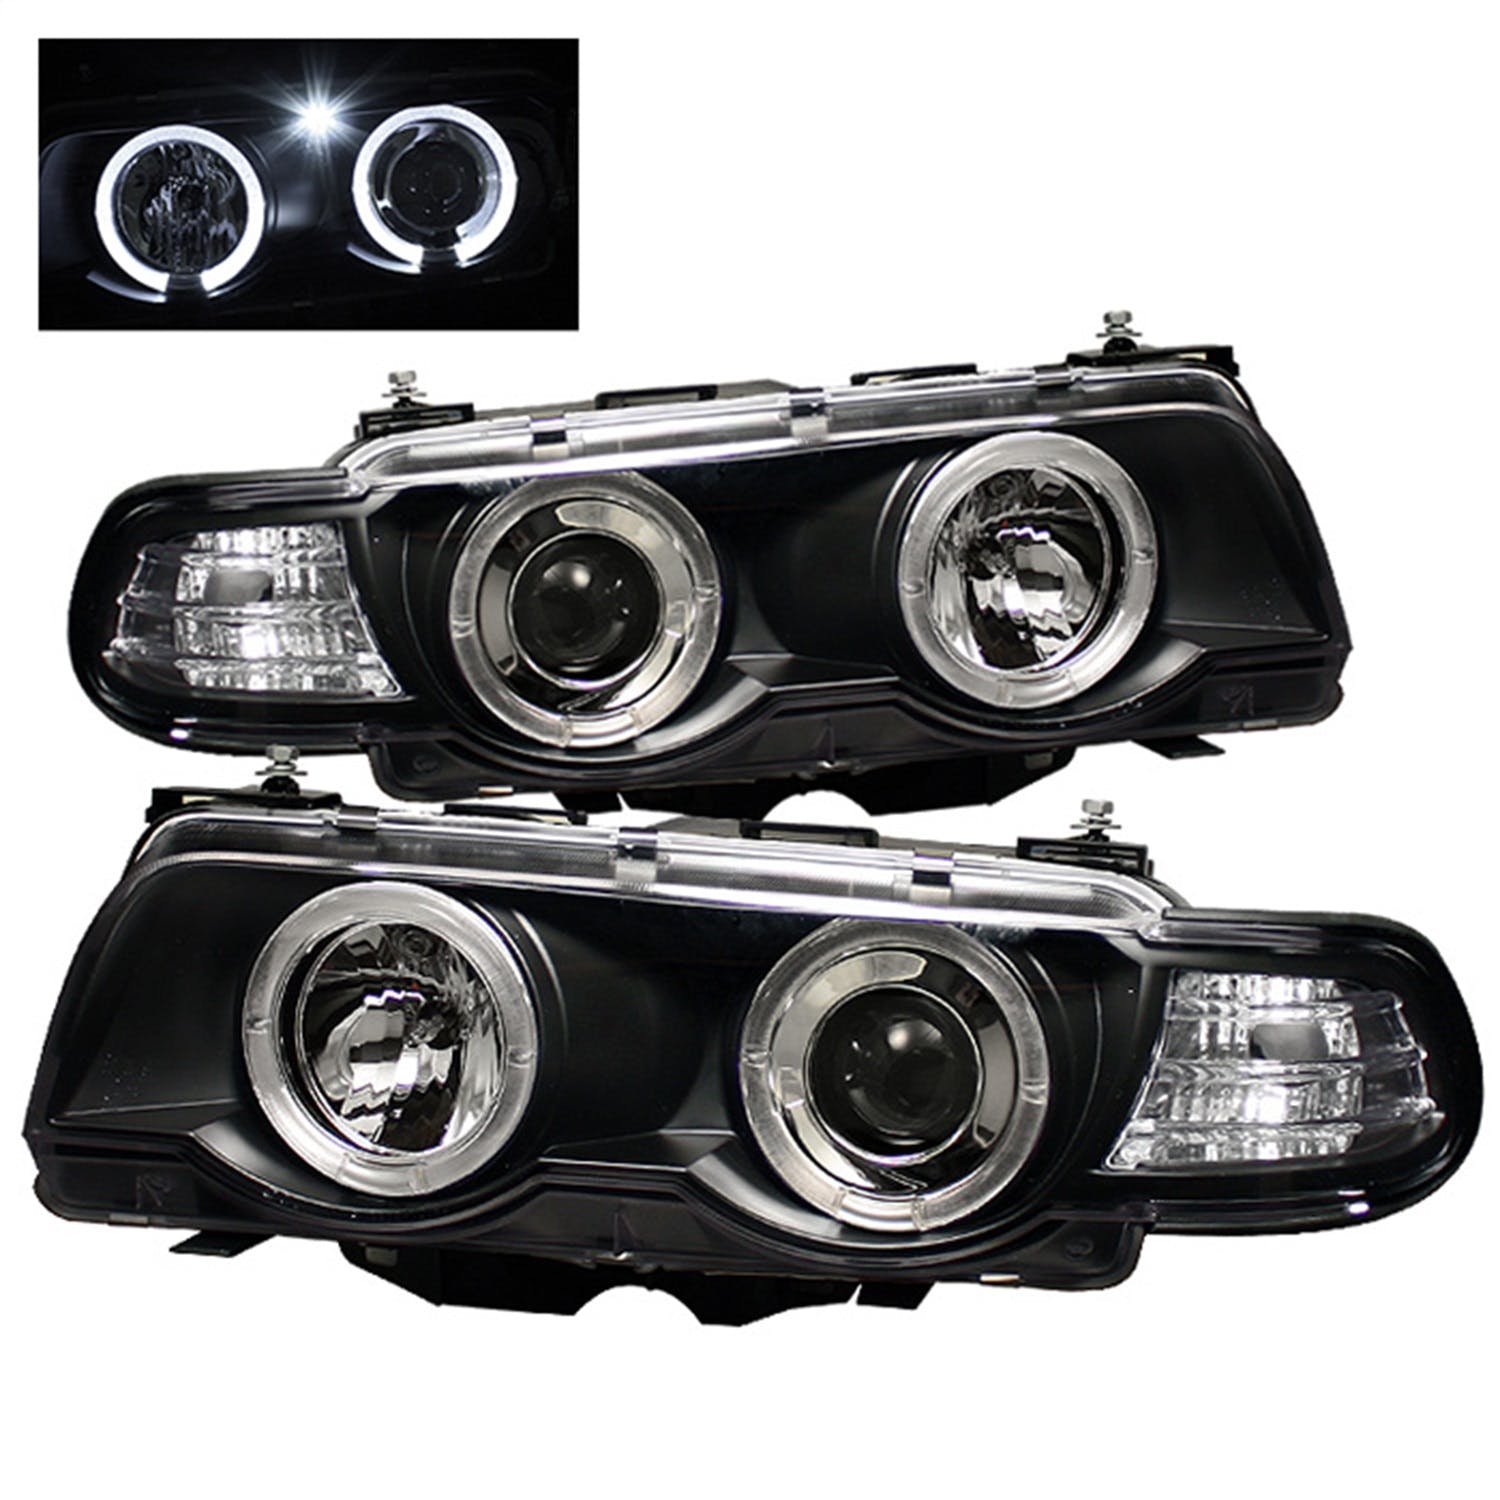 Spyder Auto 5008862 (Spyder) BMW E38 7-Series 99-01 Projector Headlights 1PC-Xenon/HID Model Only (